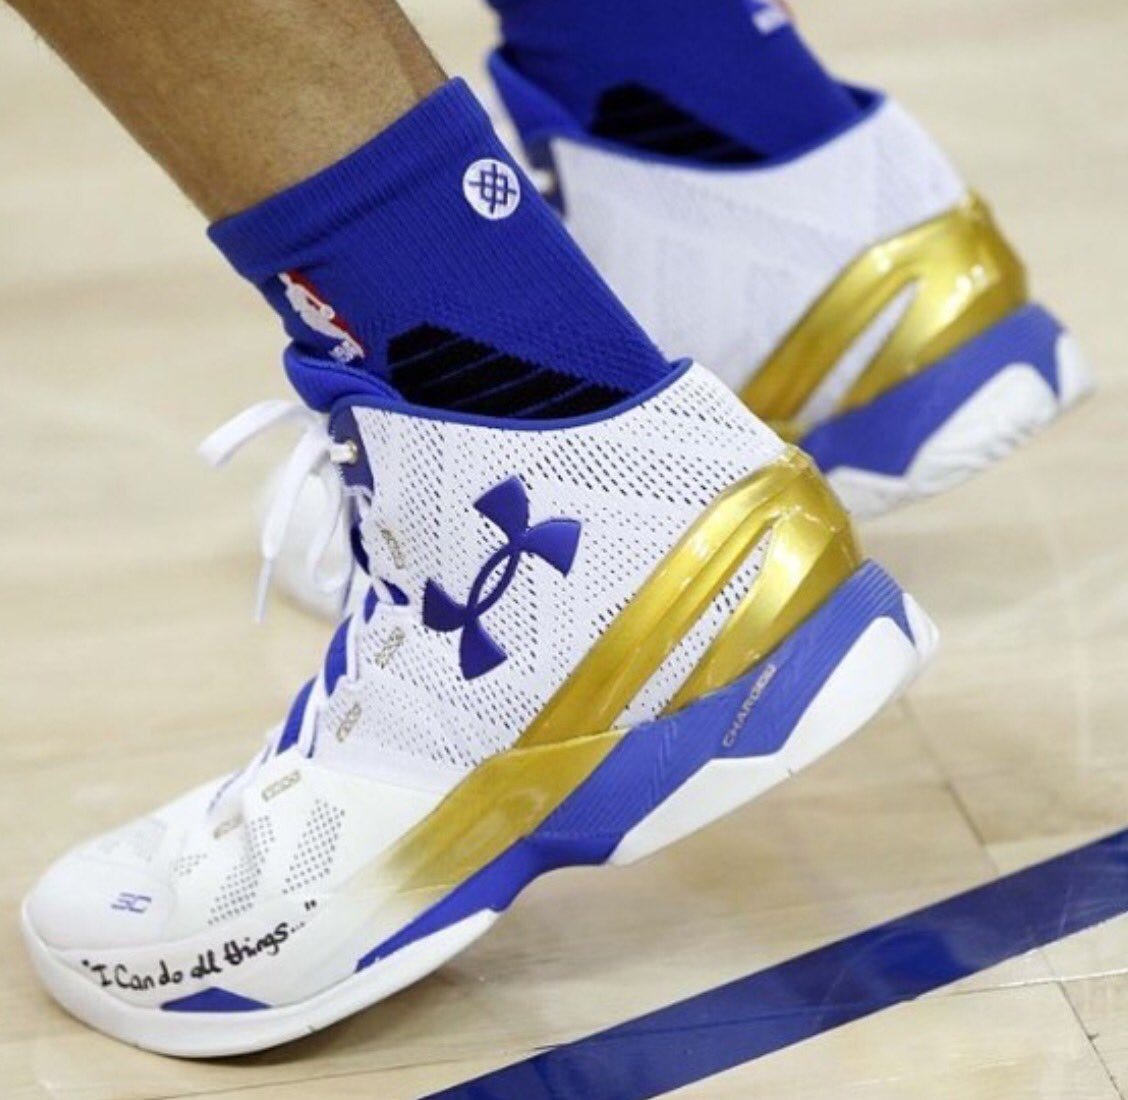 steph curry i can do all things shoes